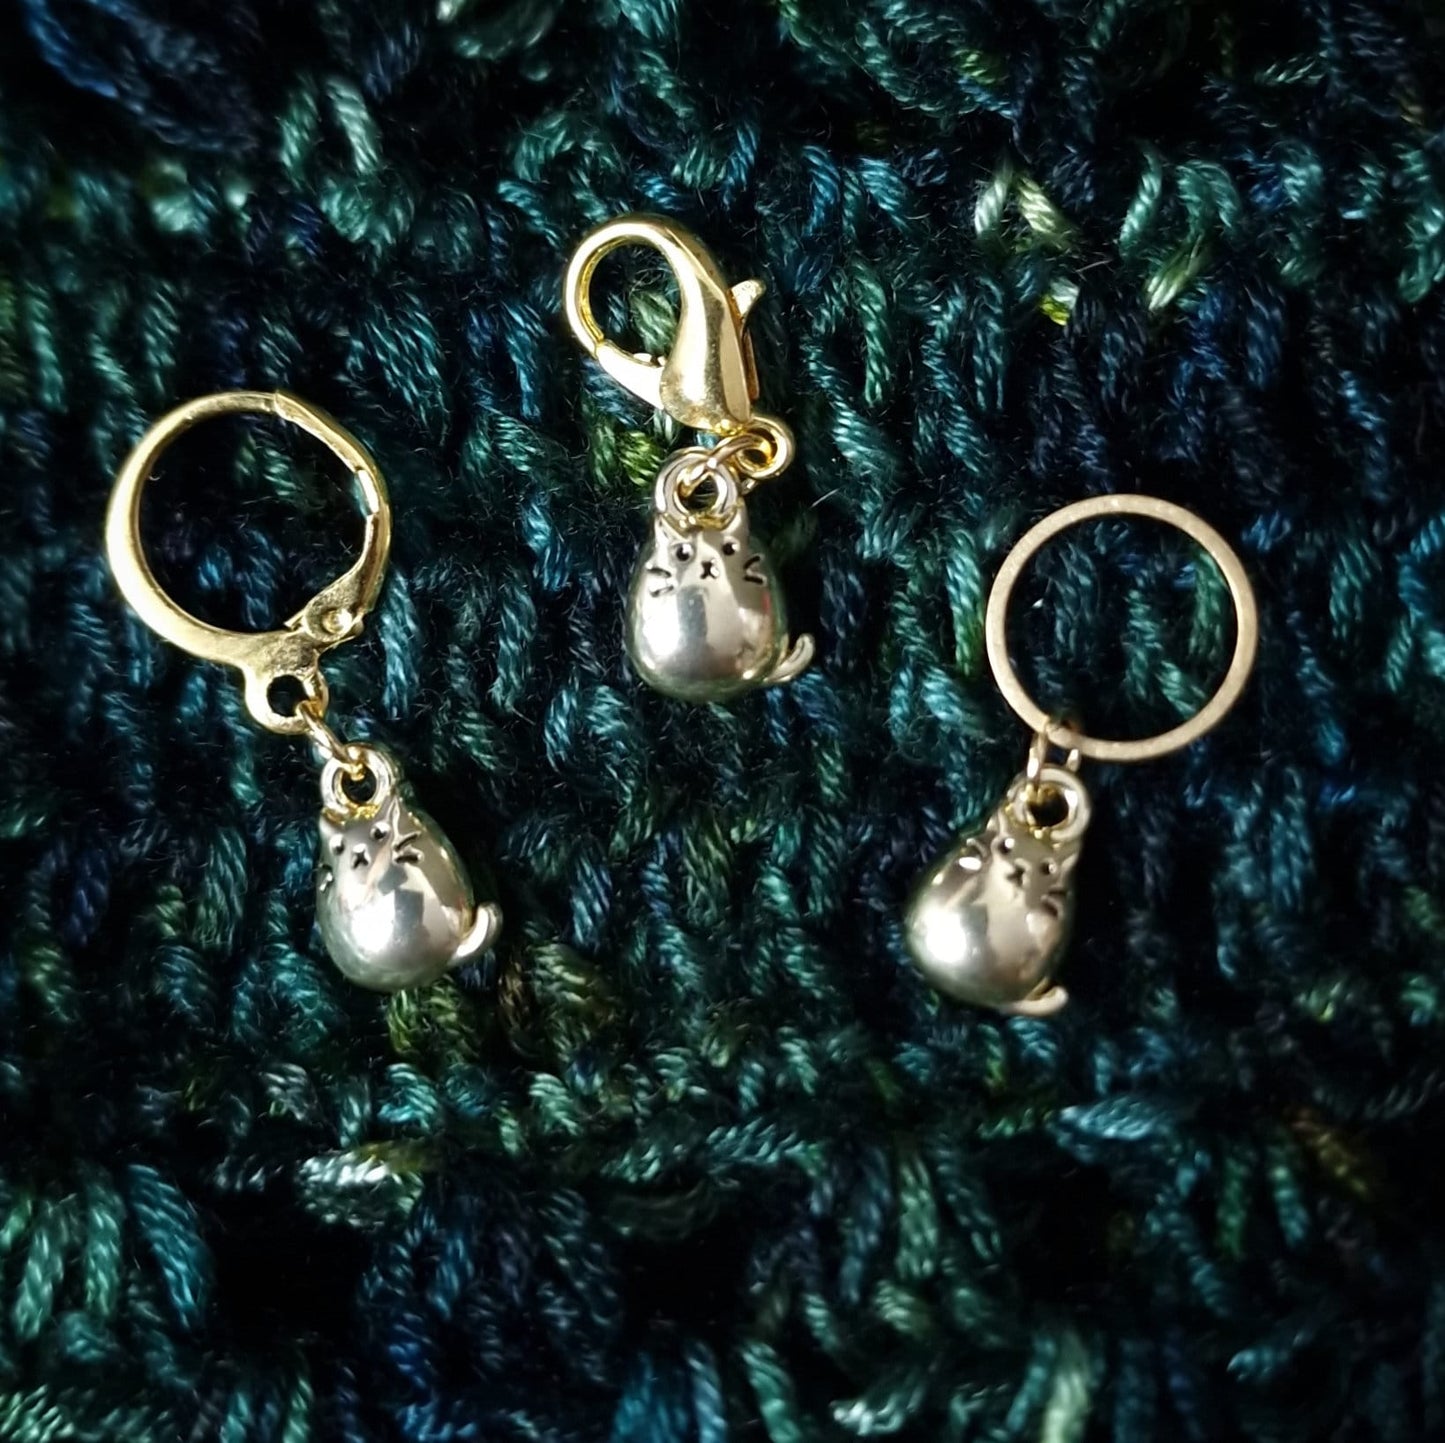 Stitch markers ~ Golden Kitty ~ Knitting notions, progress markers, progress keepers, knitting tools, crochet notions